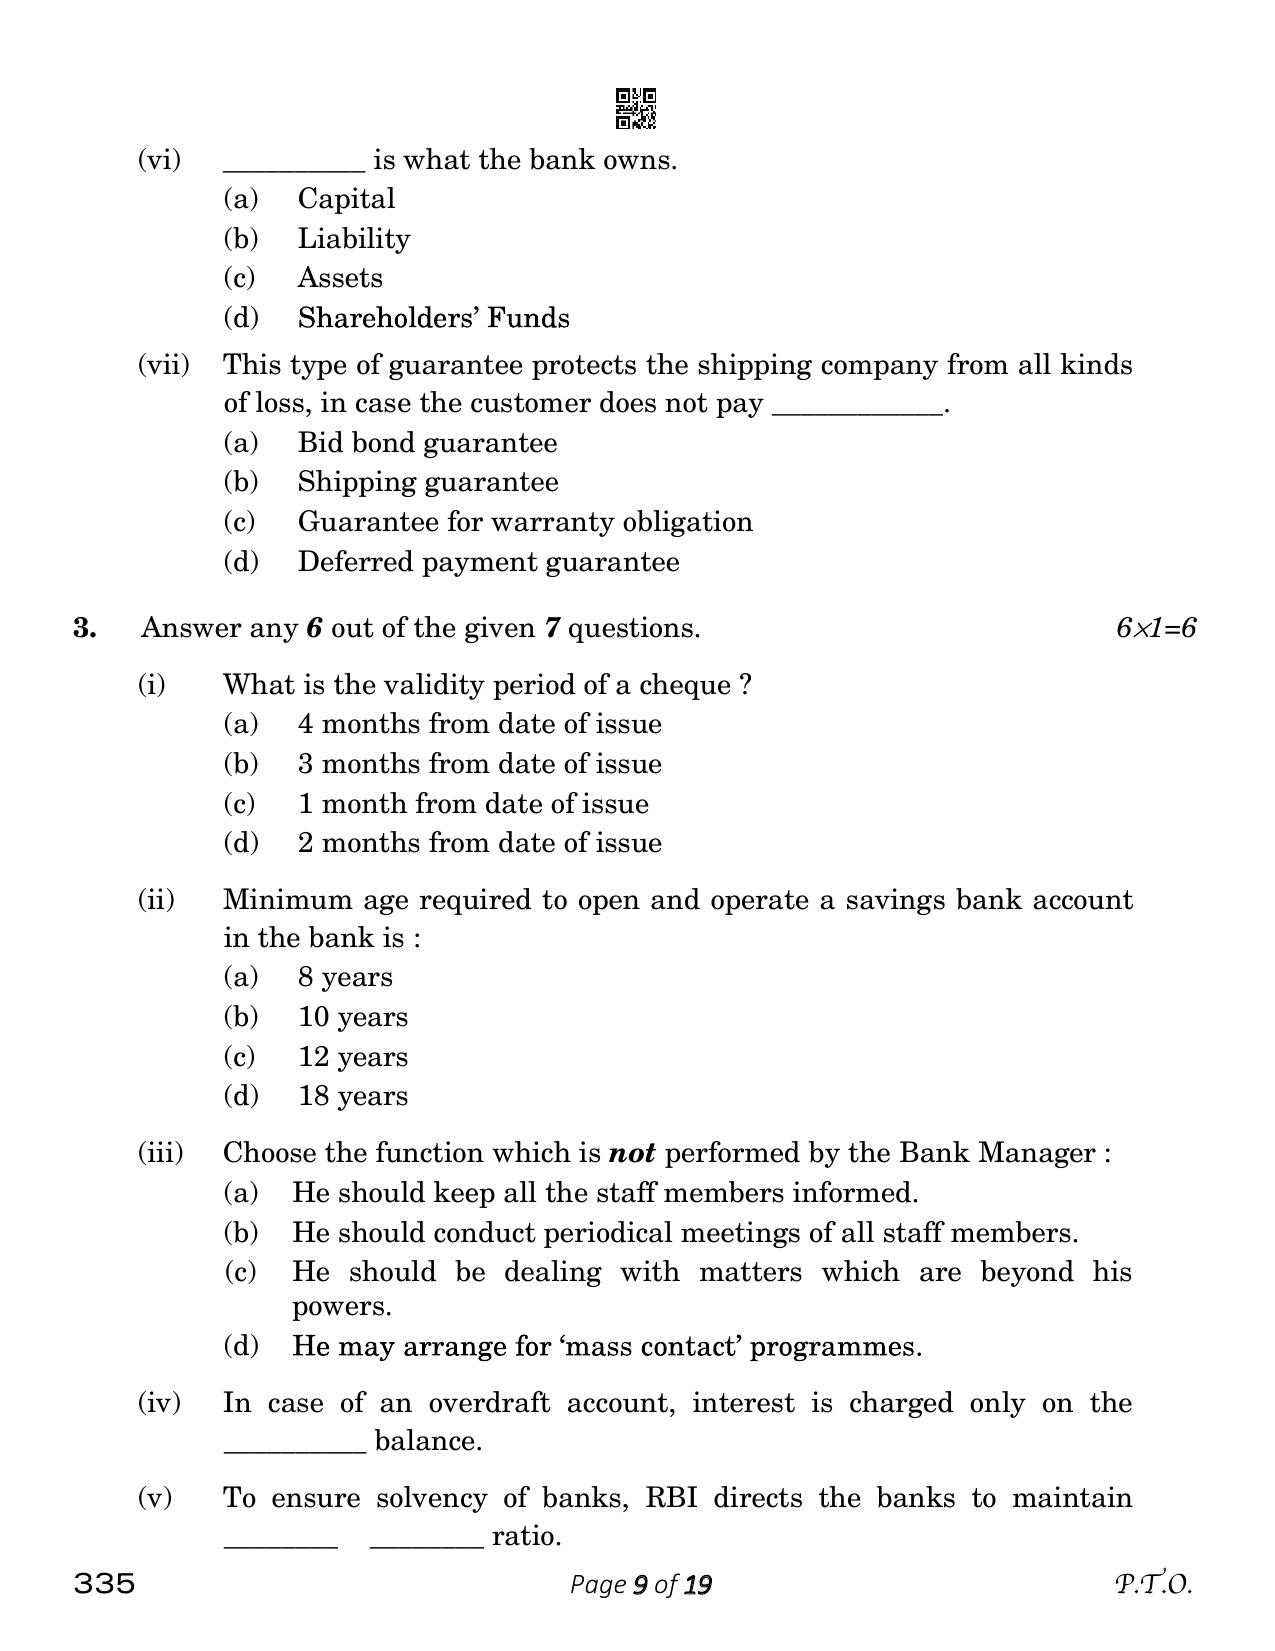 CBSE Class 12 Banking (Compartment) 2023 Question Paper - Page 9